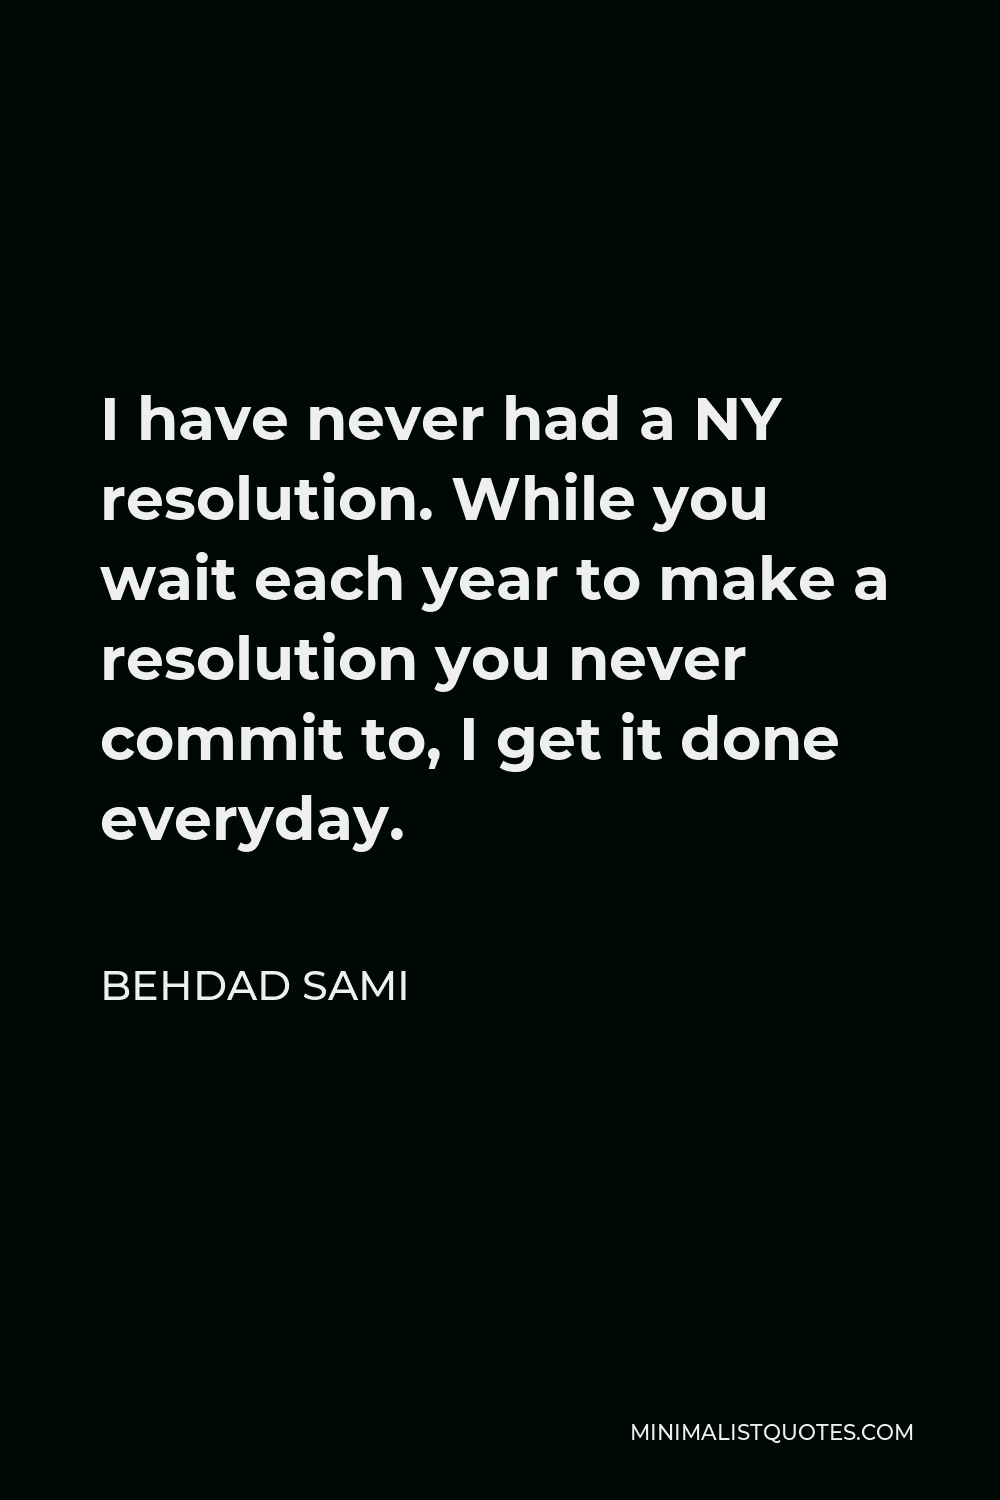 Behdad Sami Quote - I have never had a NY resolution. While you wait each year to make a resolution you never commit to, I get it done everyday.